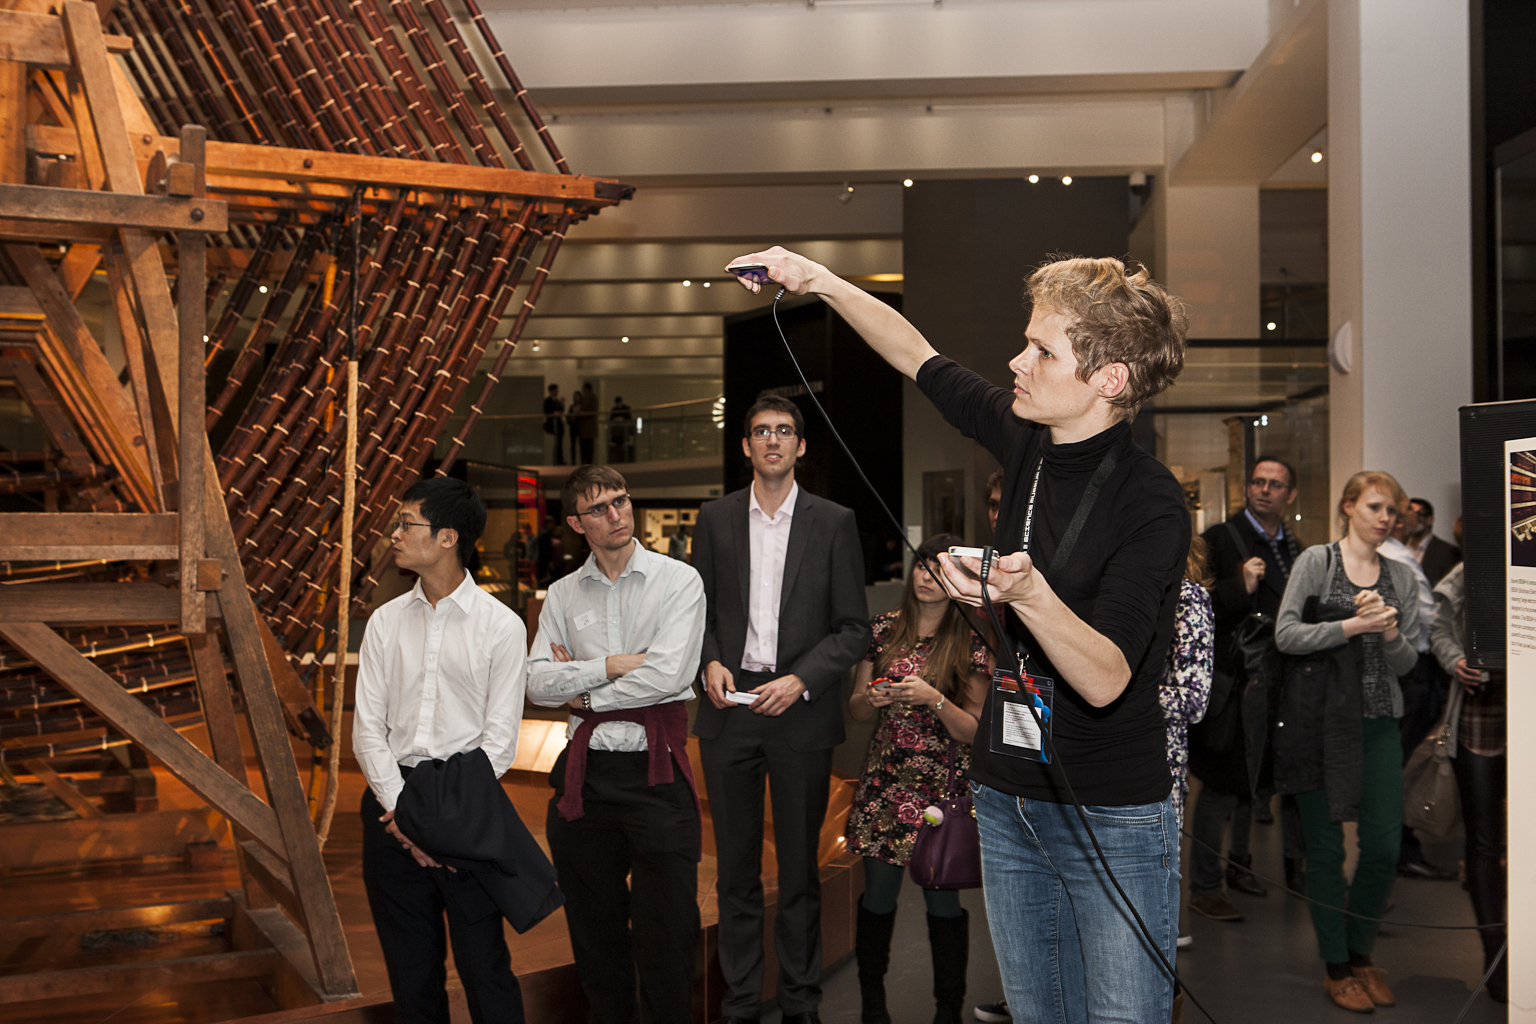 Visitors watch a musical performance of Rafael Lozano-Hemmer's Fiducial Voice Beacons artwork. Image credit: Science Museum